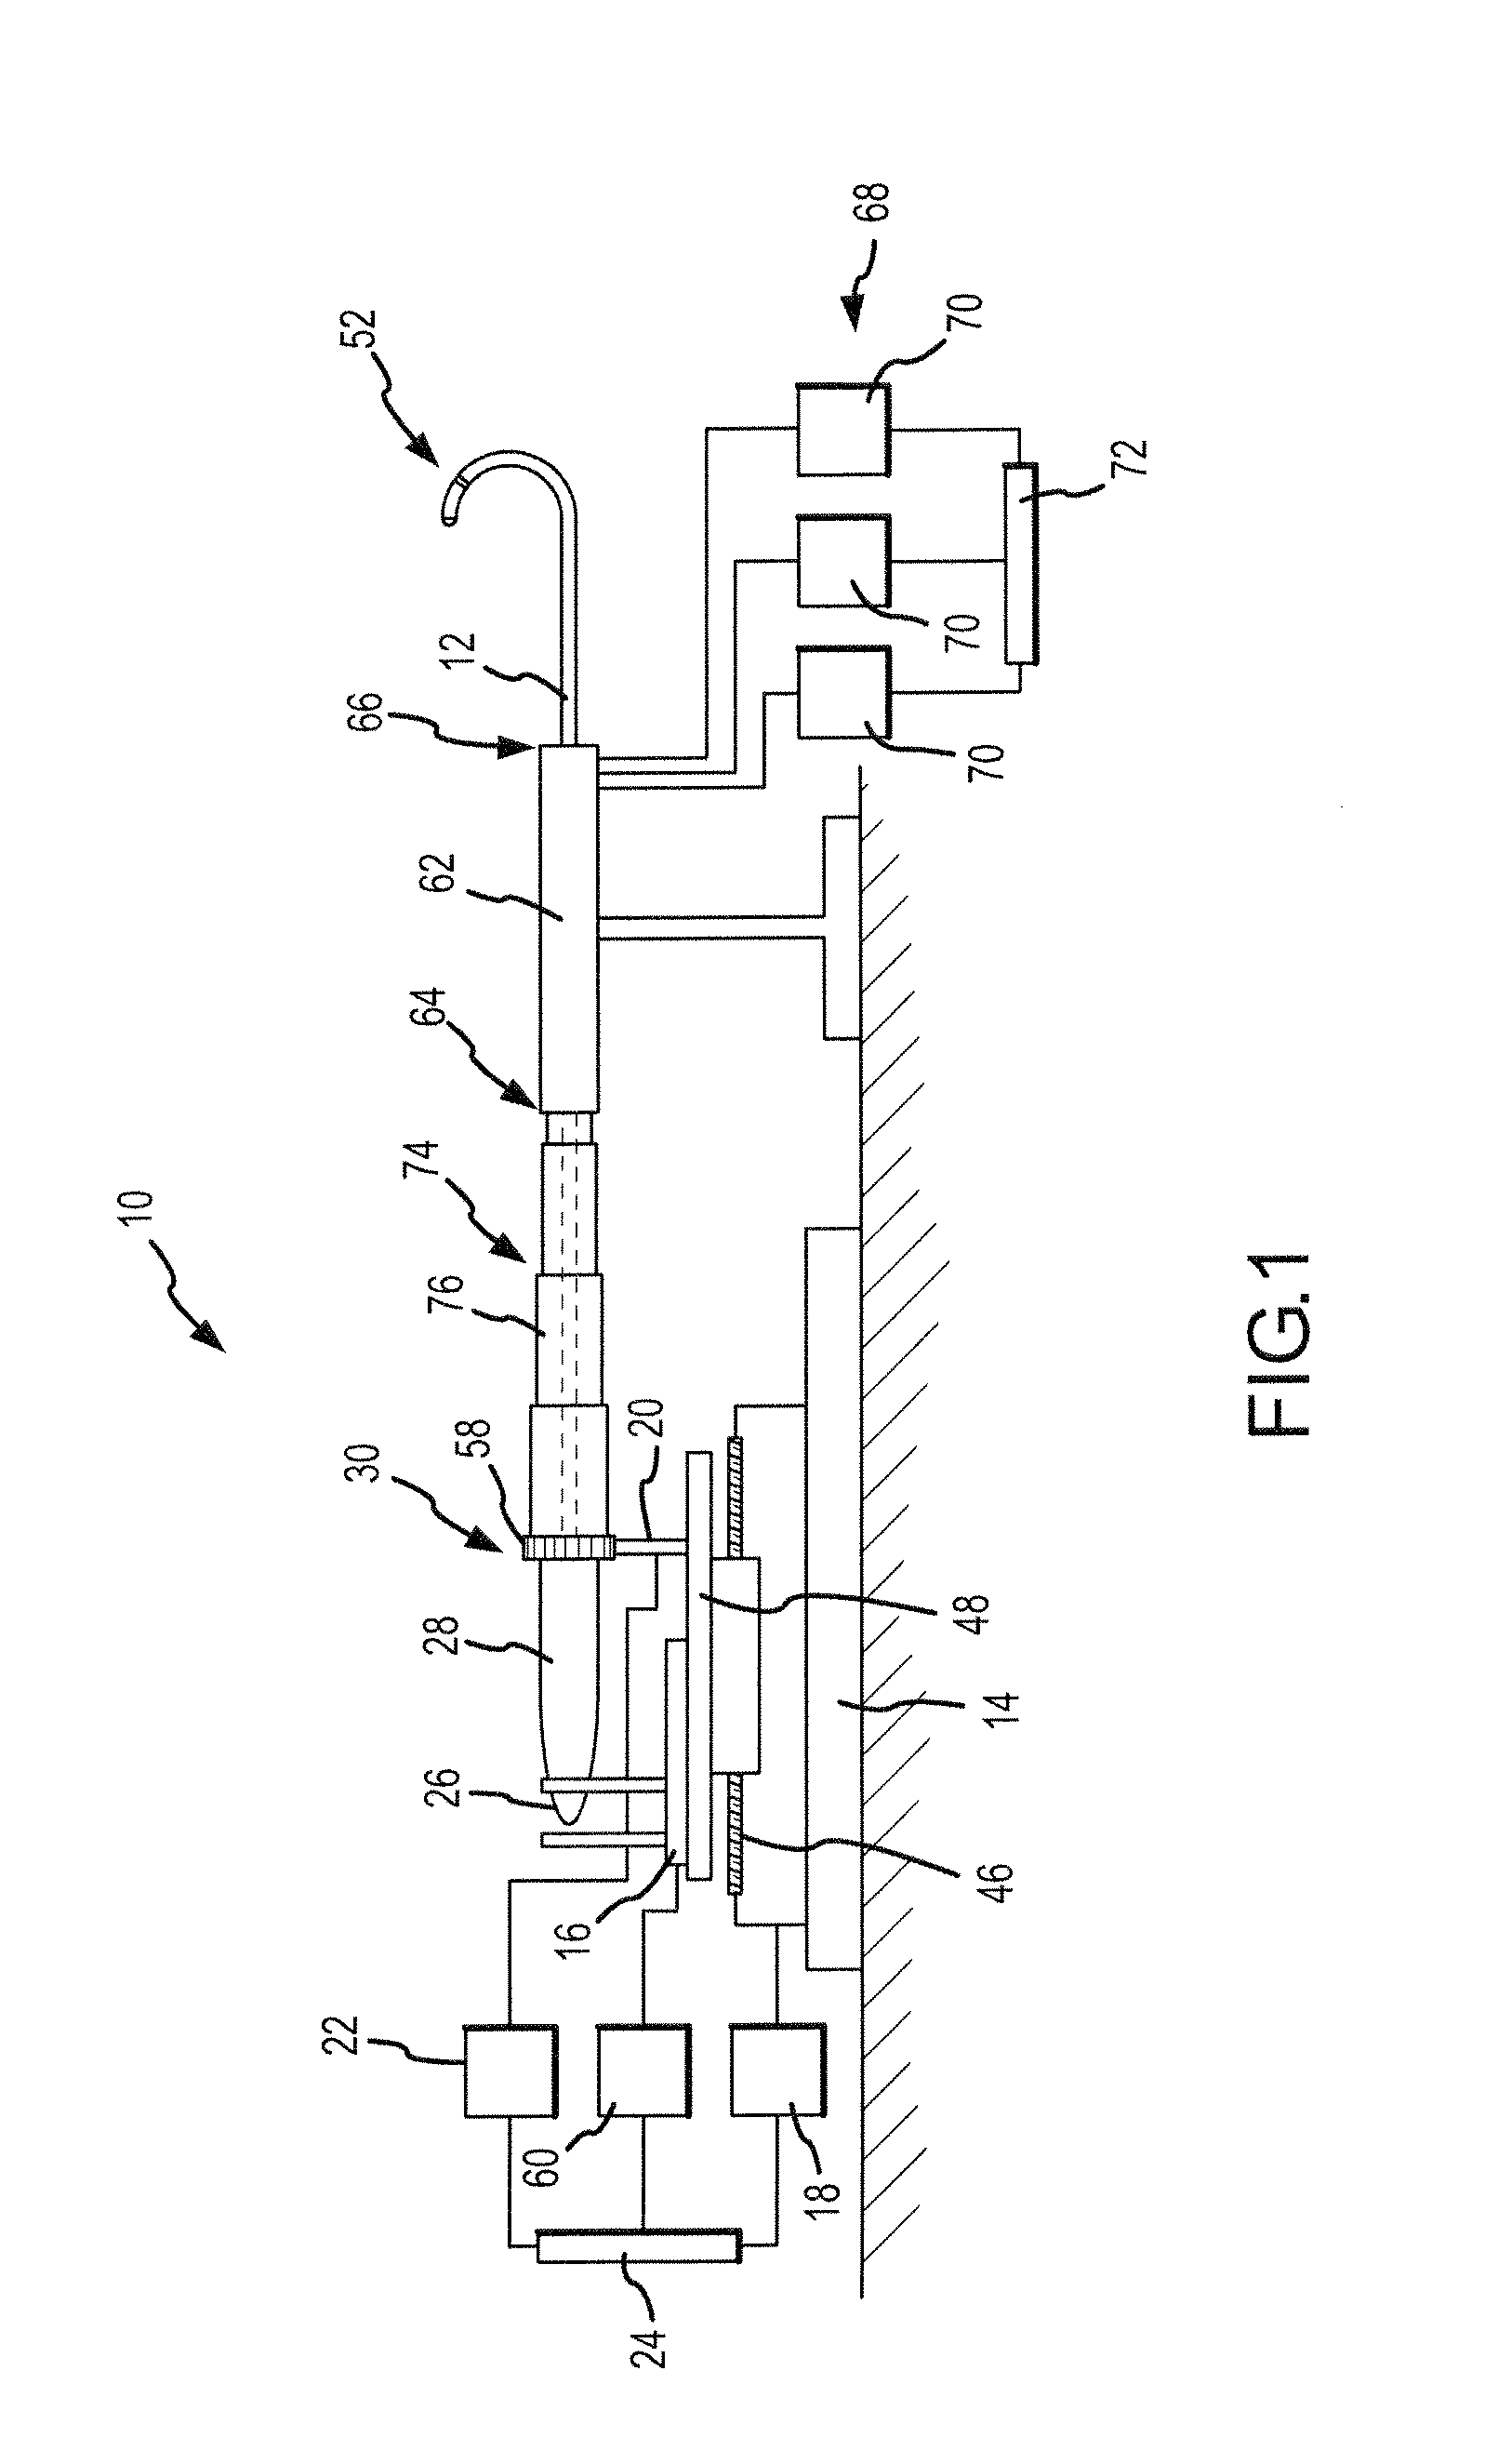 Robotic surgical system and method for automated therapy delivery